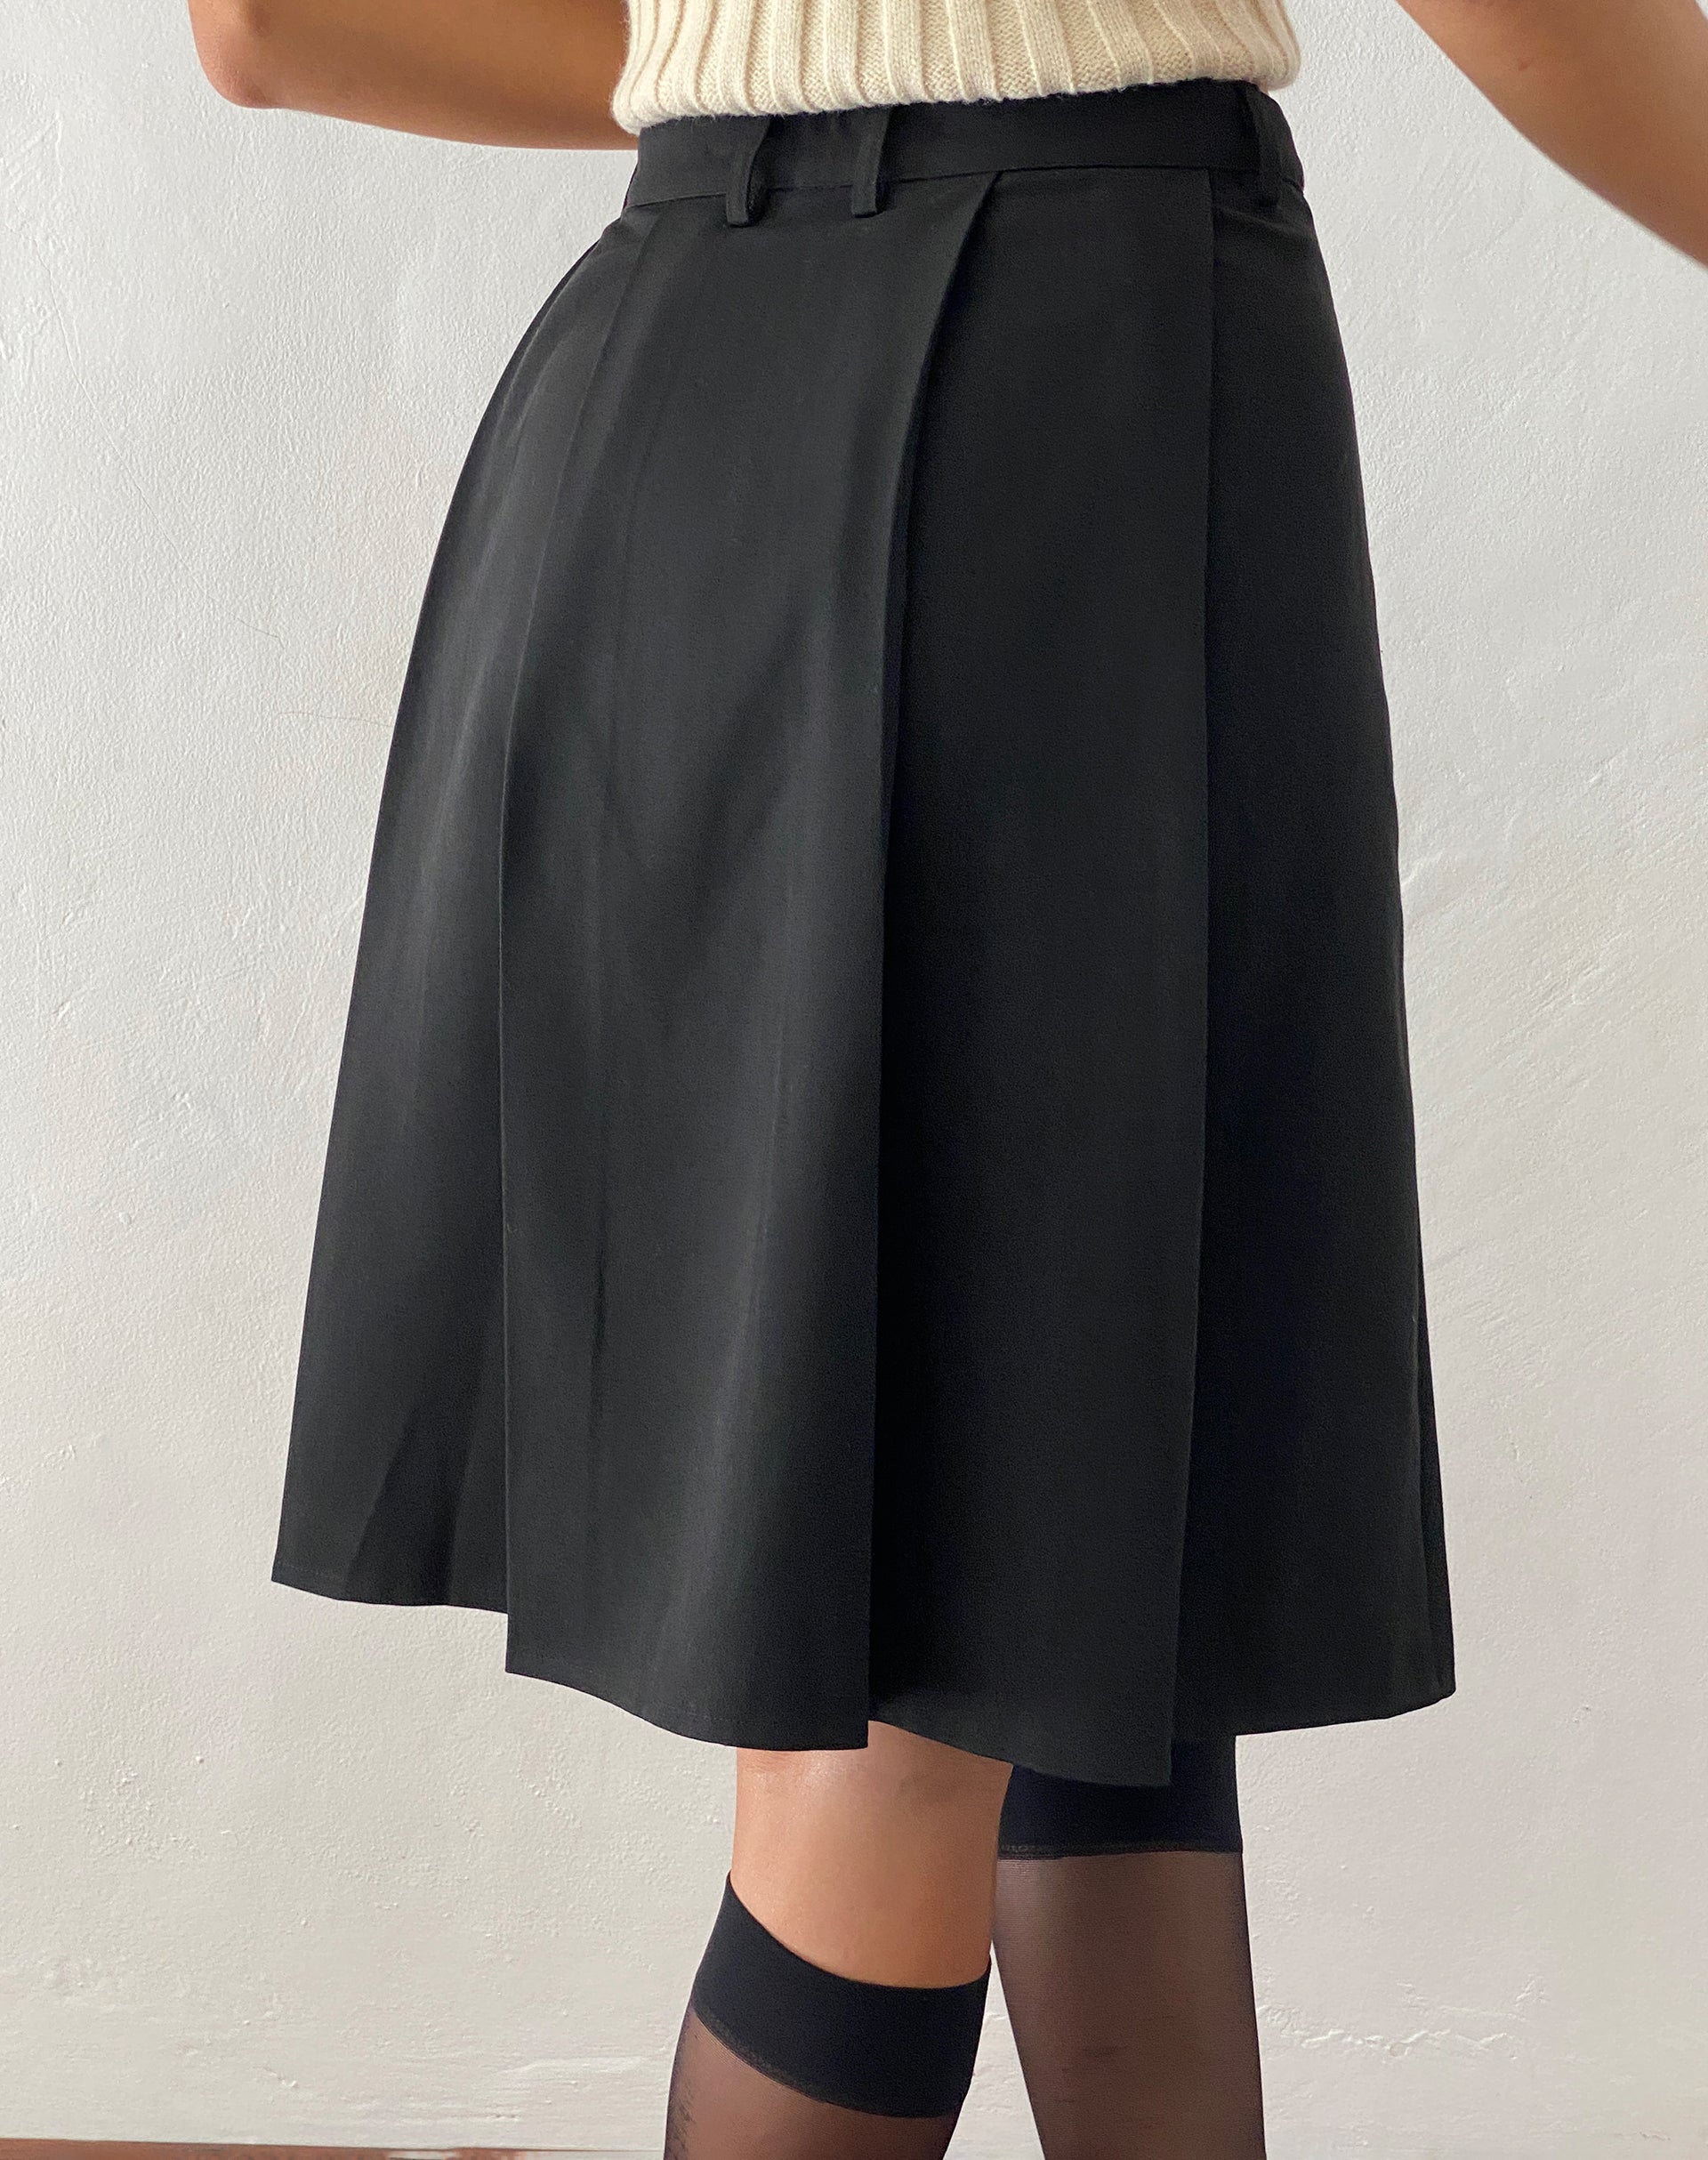 image of Colette Pleated Knee Length Skirt in Black Tailoring